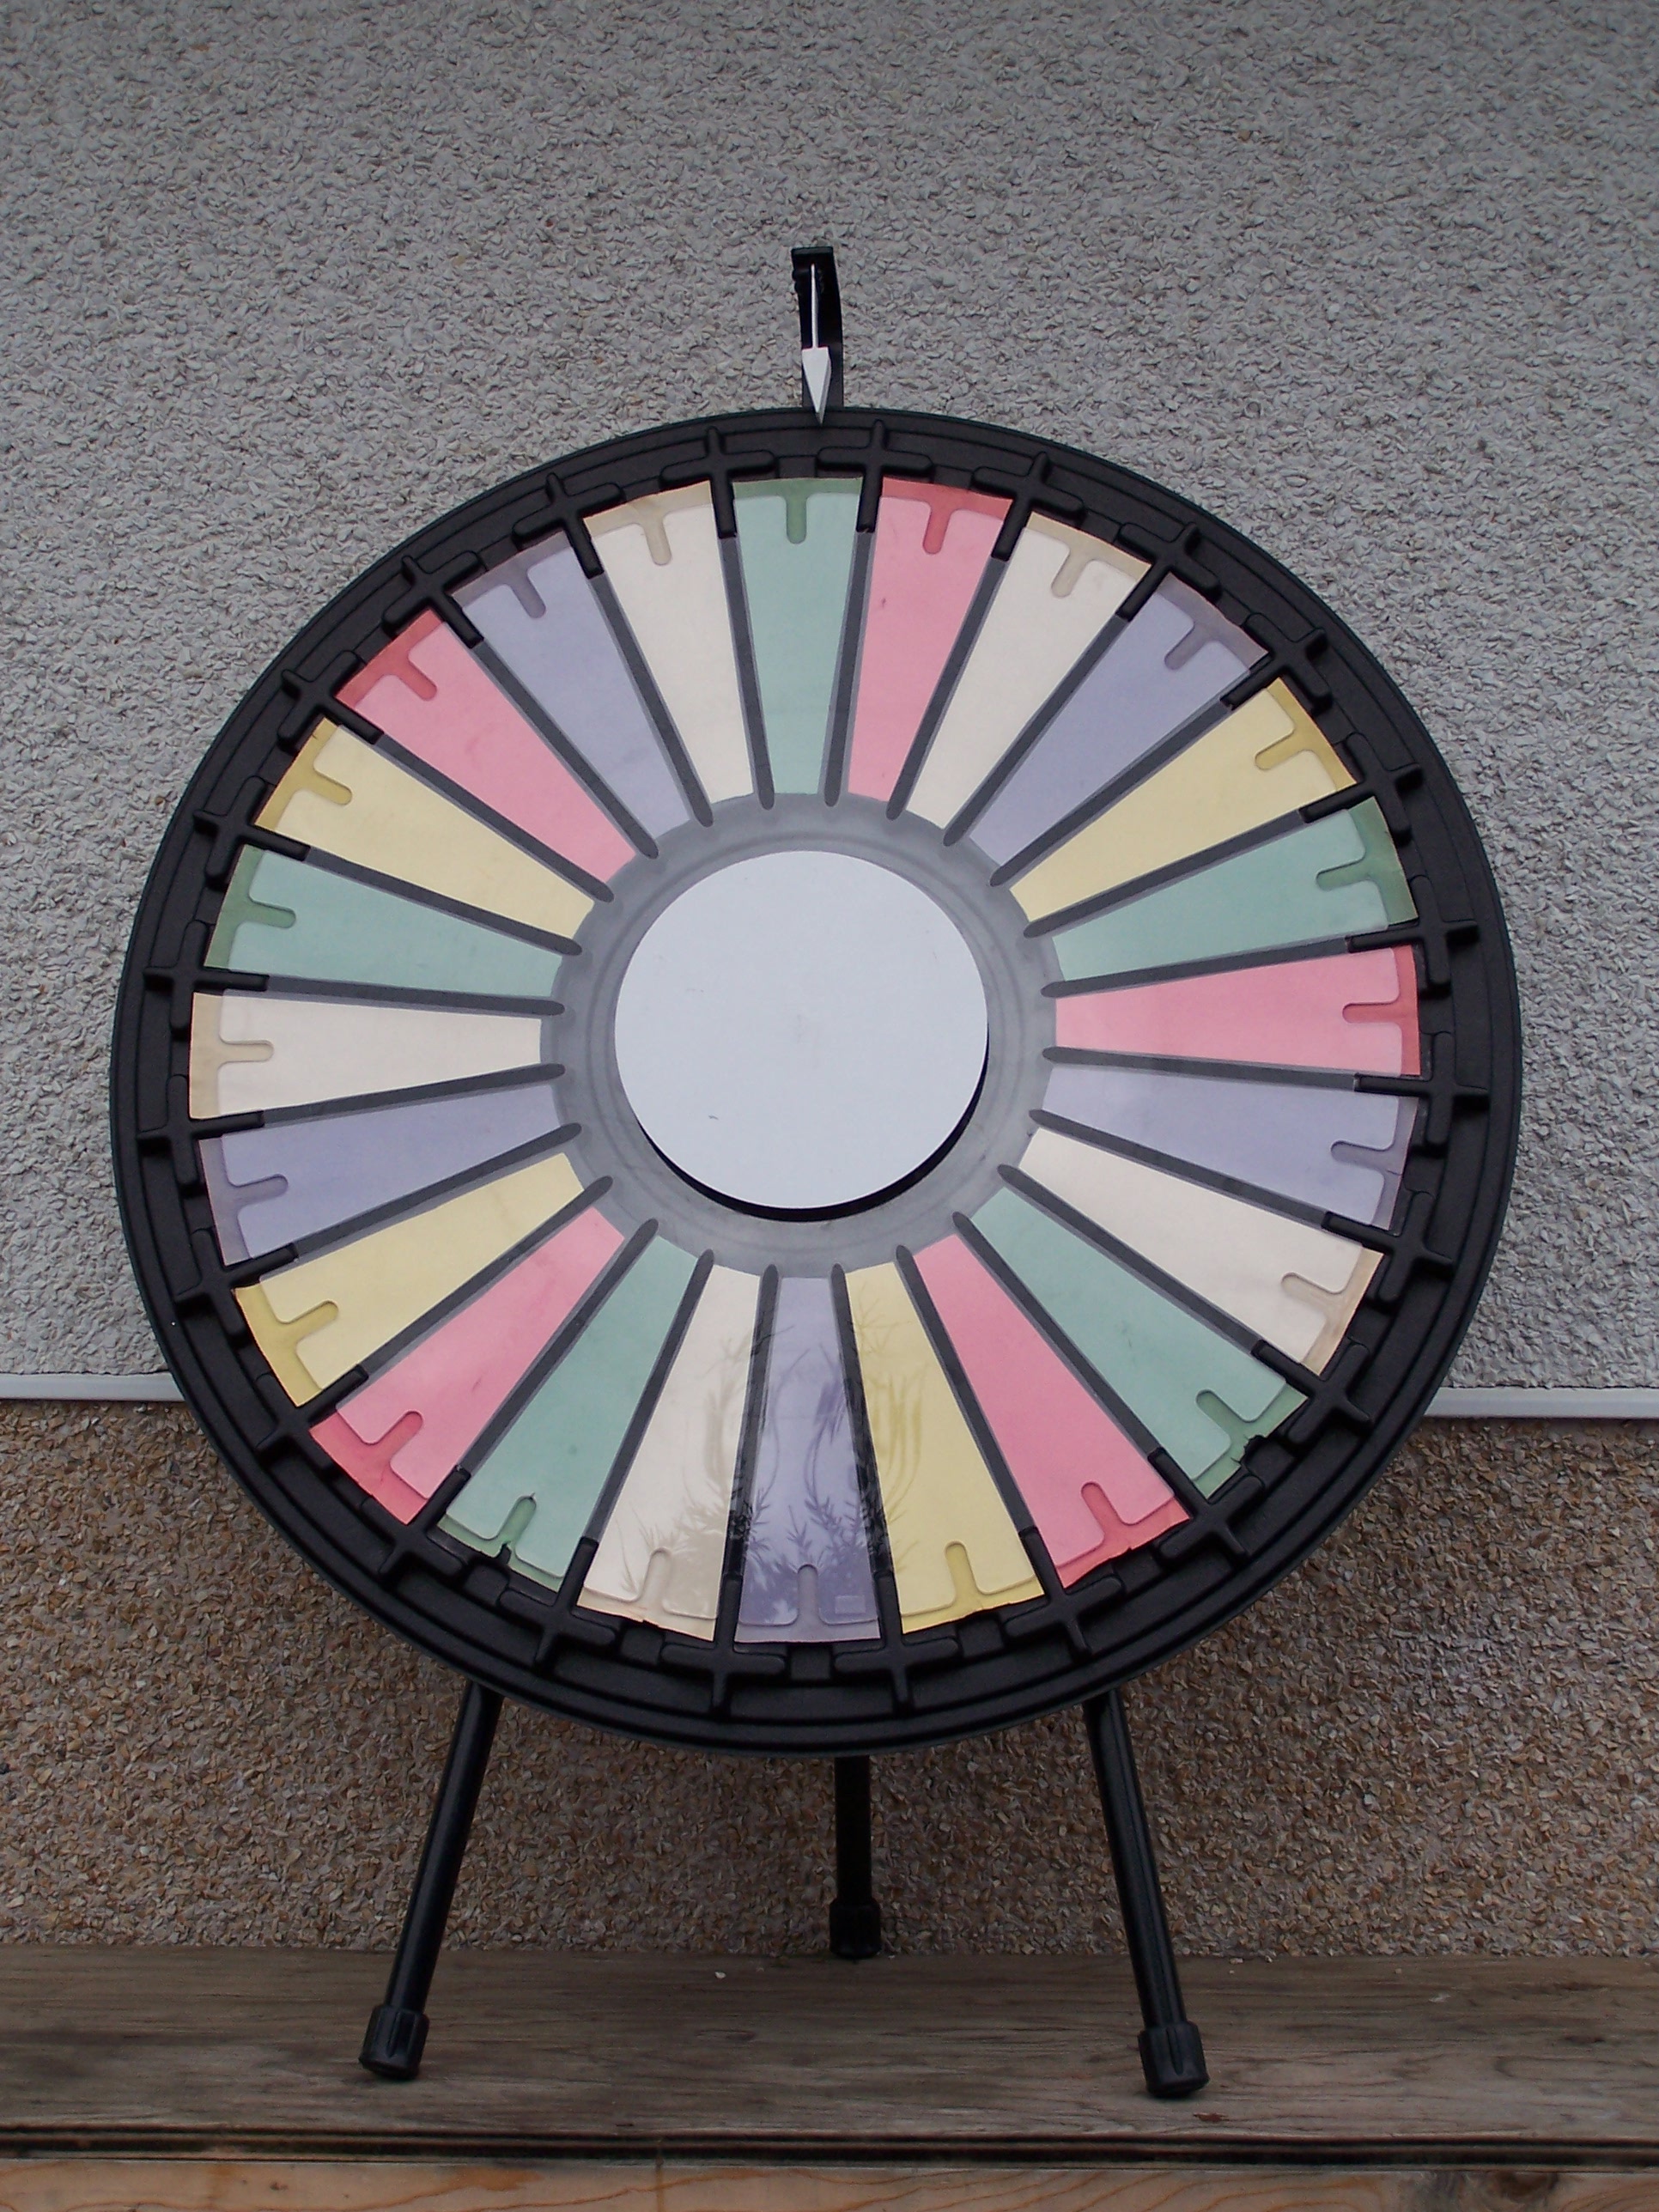 Used wheel of fortune slot machines for sale Flour